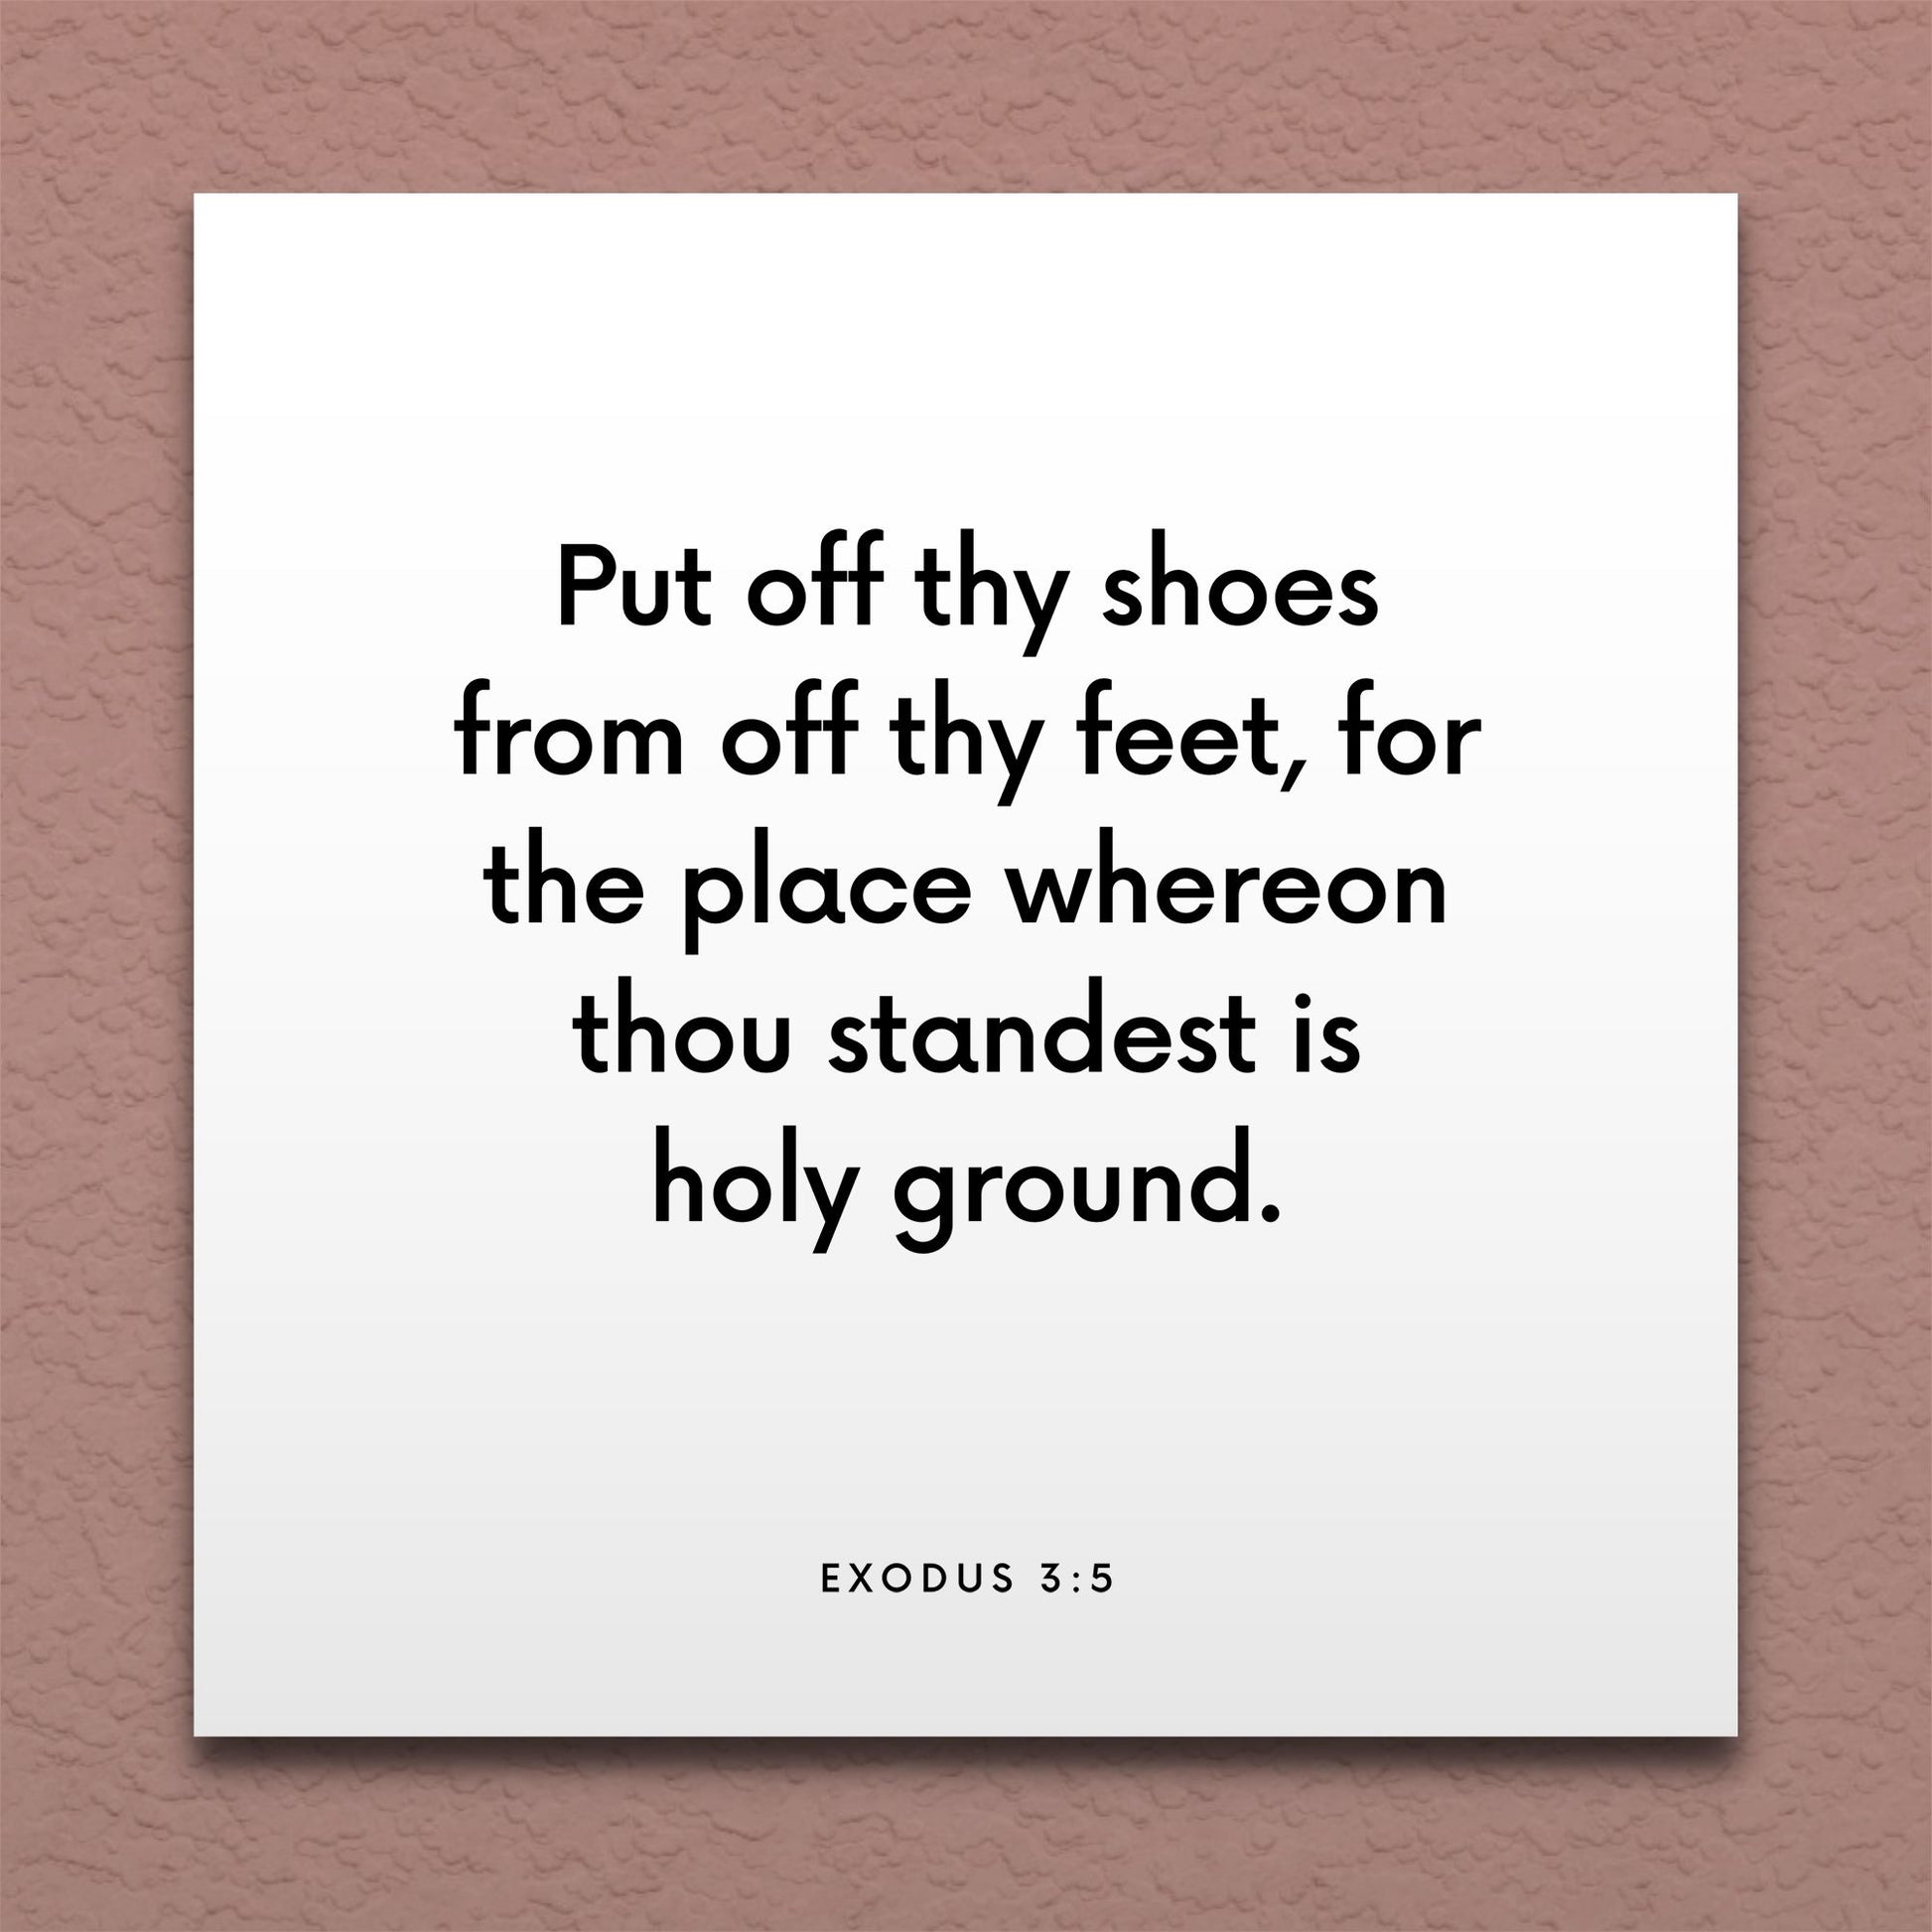 Wall-mounted scripture tile for Exodus 3:5 - "Put off thy shoes from off thy feet"